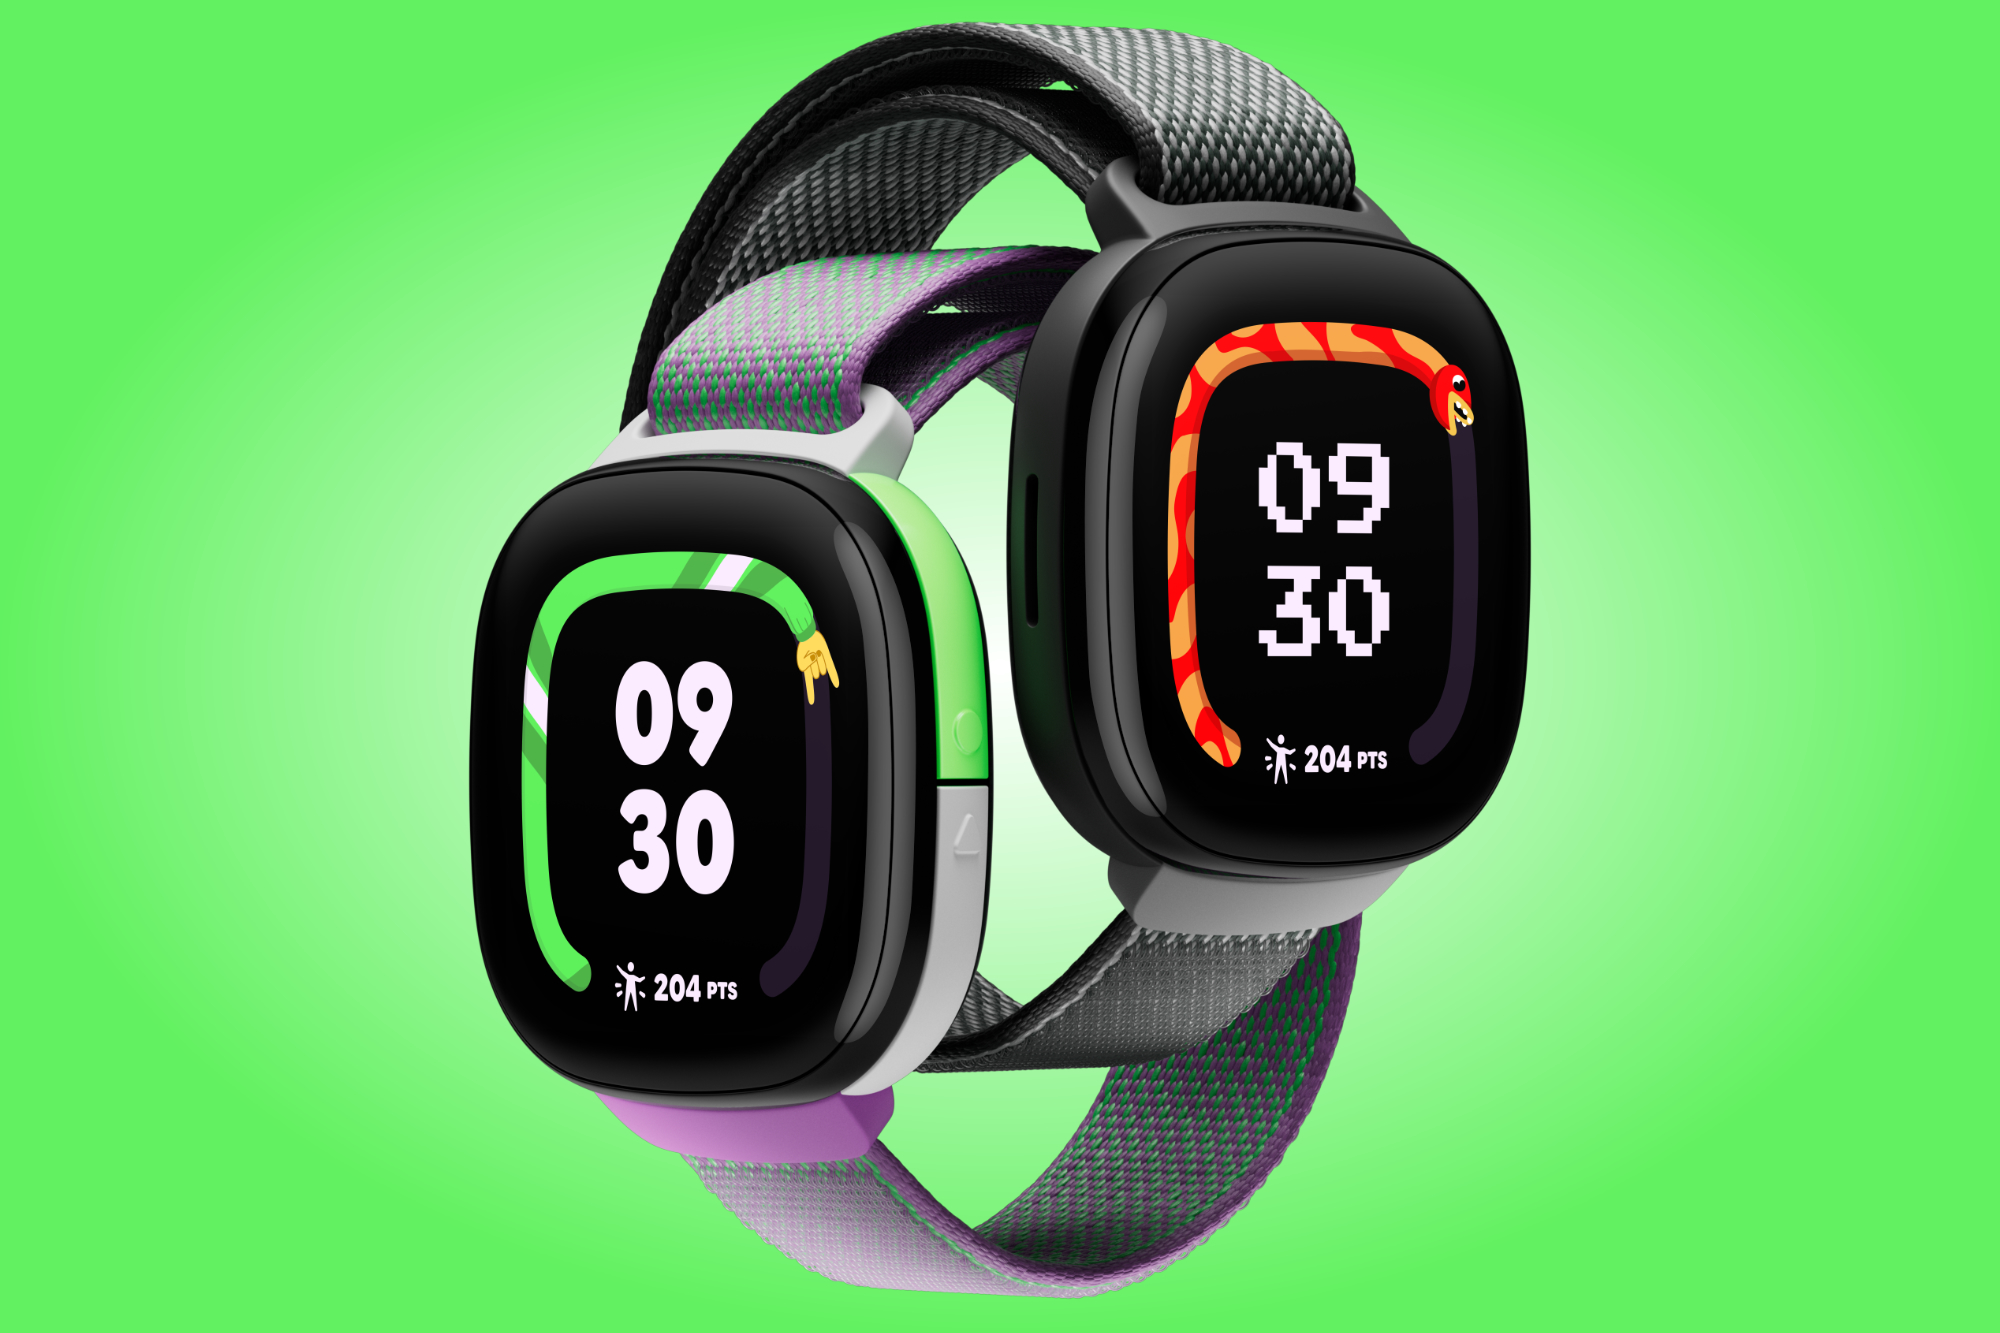 Render oficial del producto Fitbit Ace LTE.